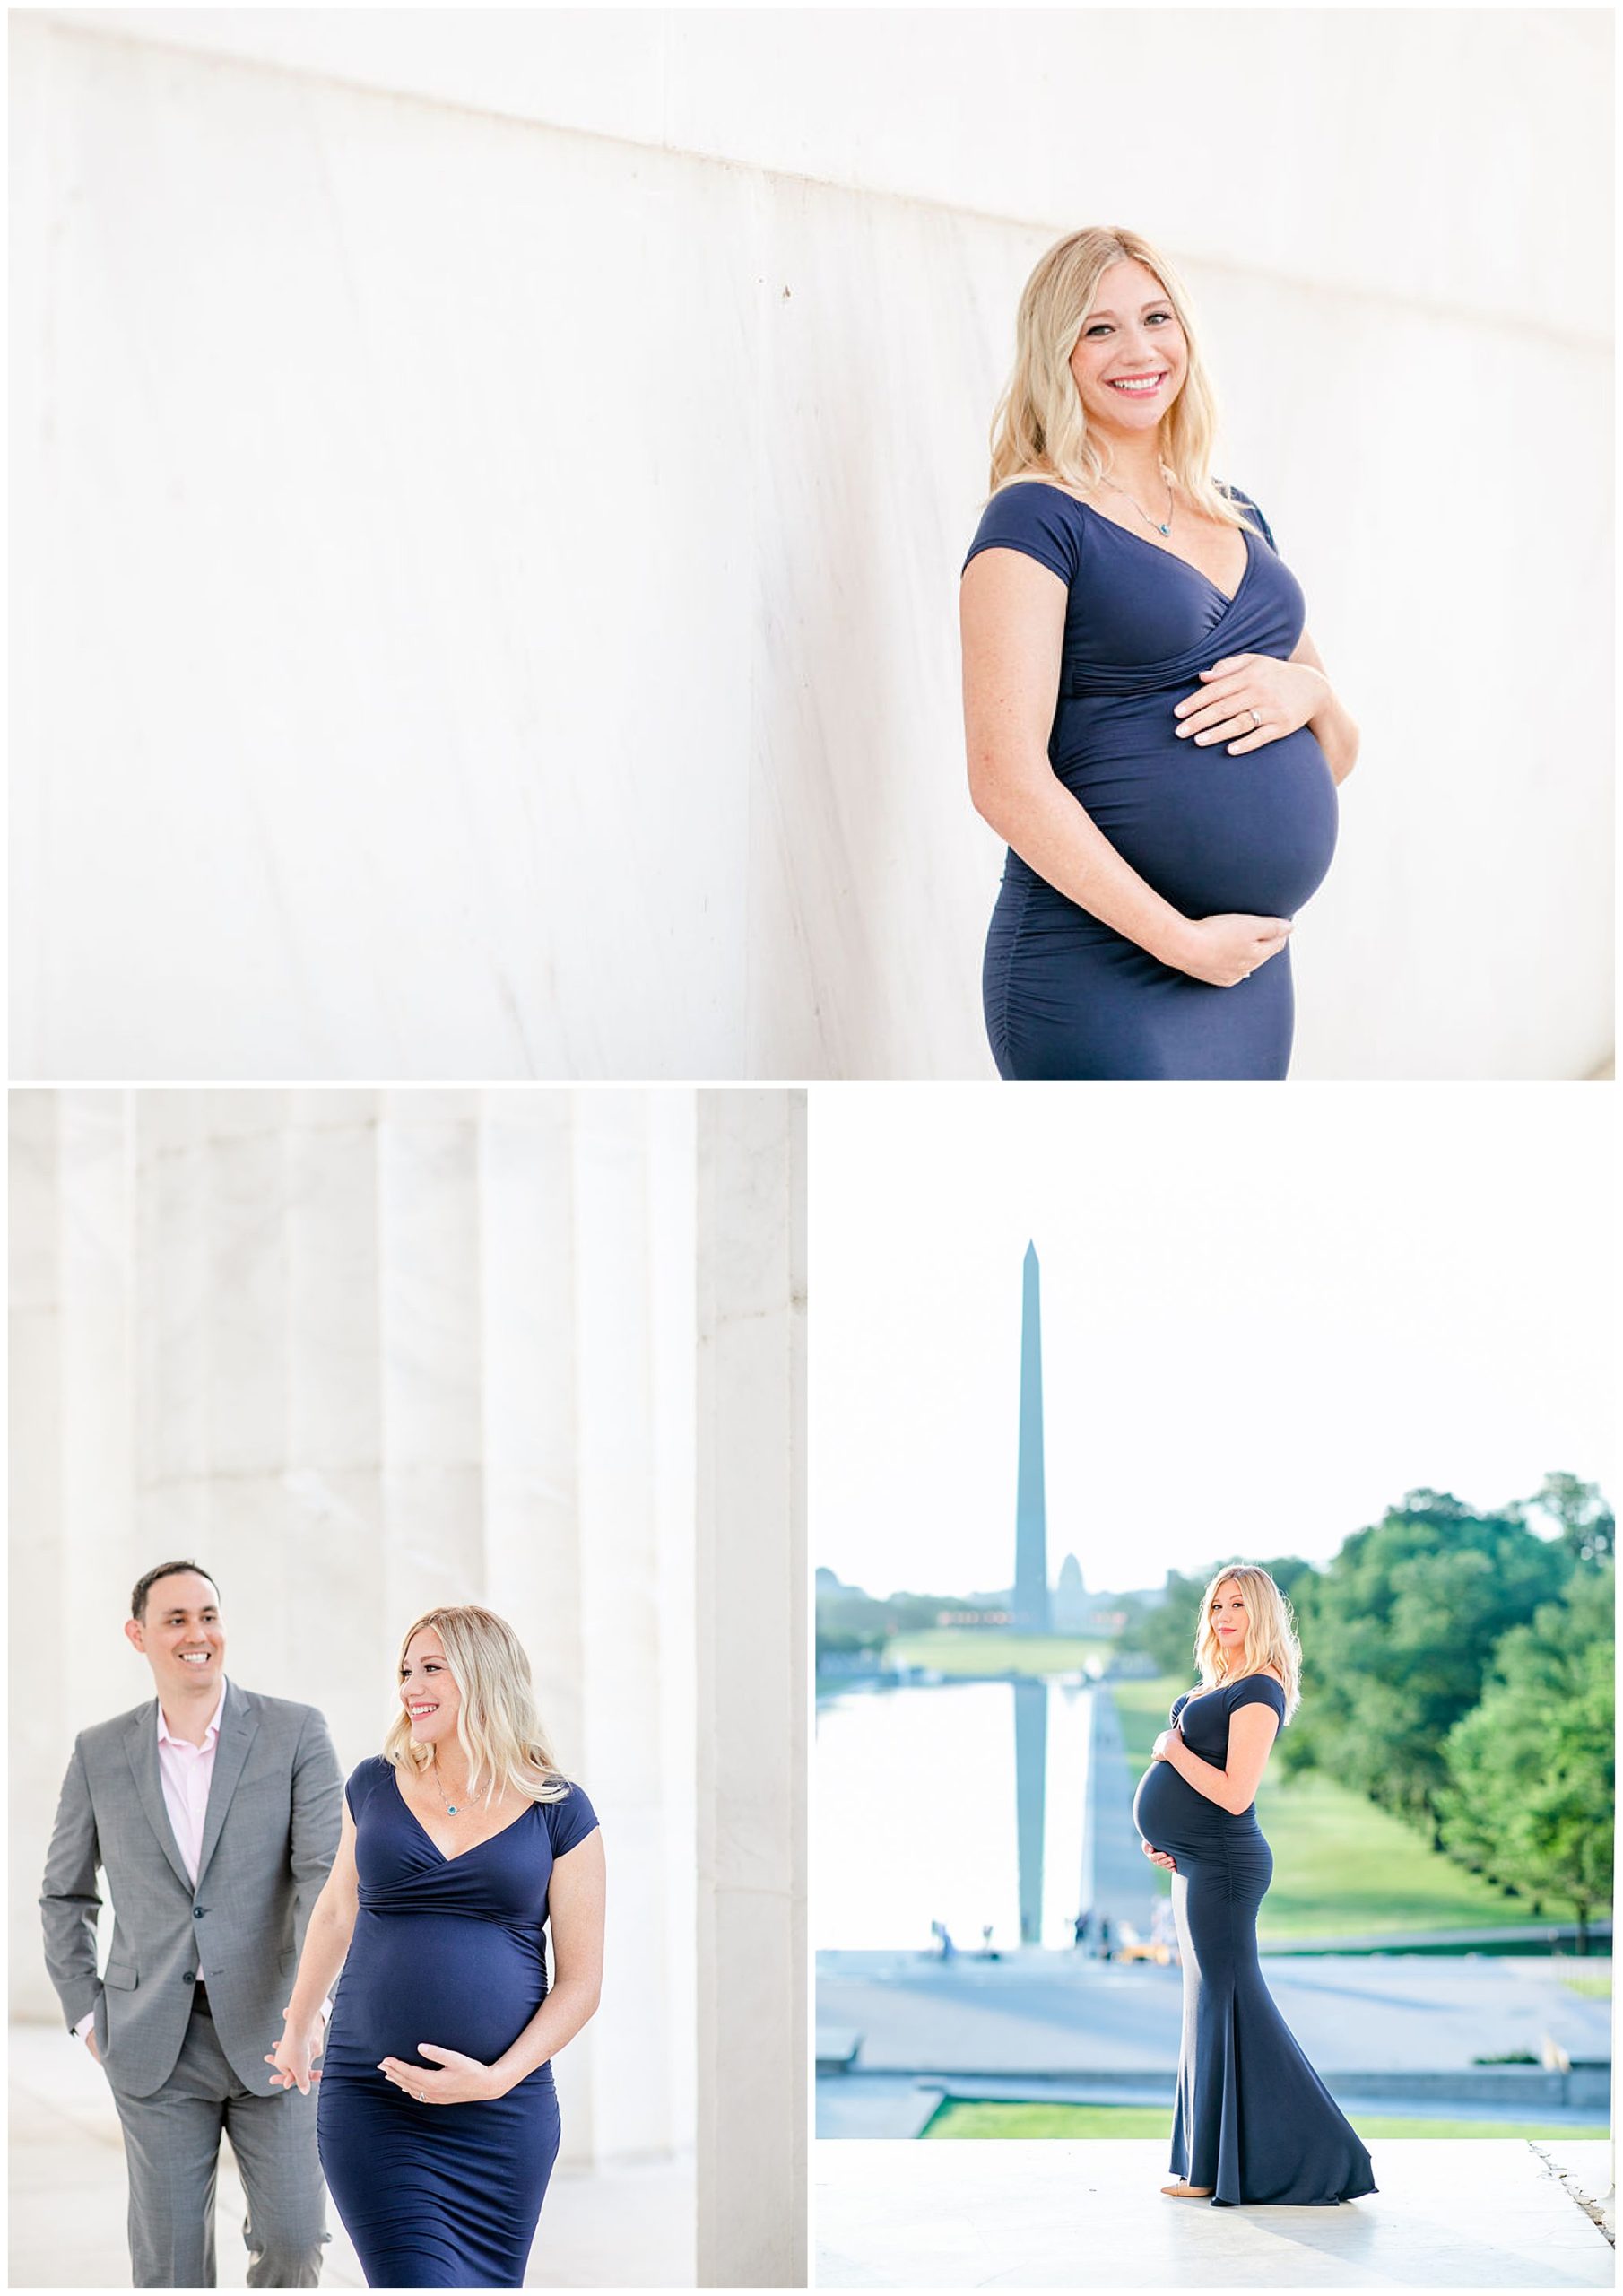 National Mall maternity photos, Lincoln Memorial maternity photos, Constitution Gardens maternity photos, DC maternity photos, DC maternity photographer, classic DC portraits, pregnant couple, natural light maternity photos, Rachel E.H. Photography, couple holding hands, woman in front of monument